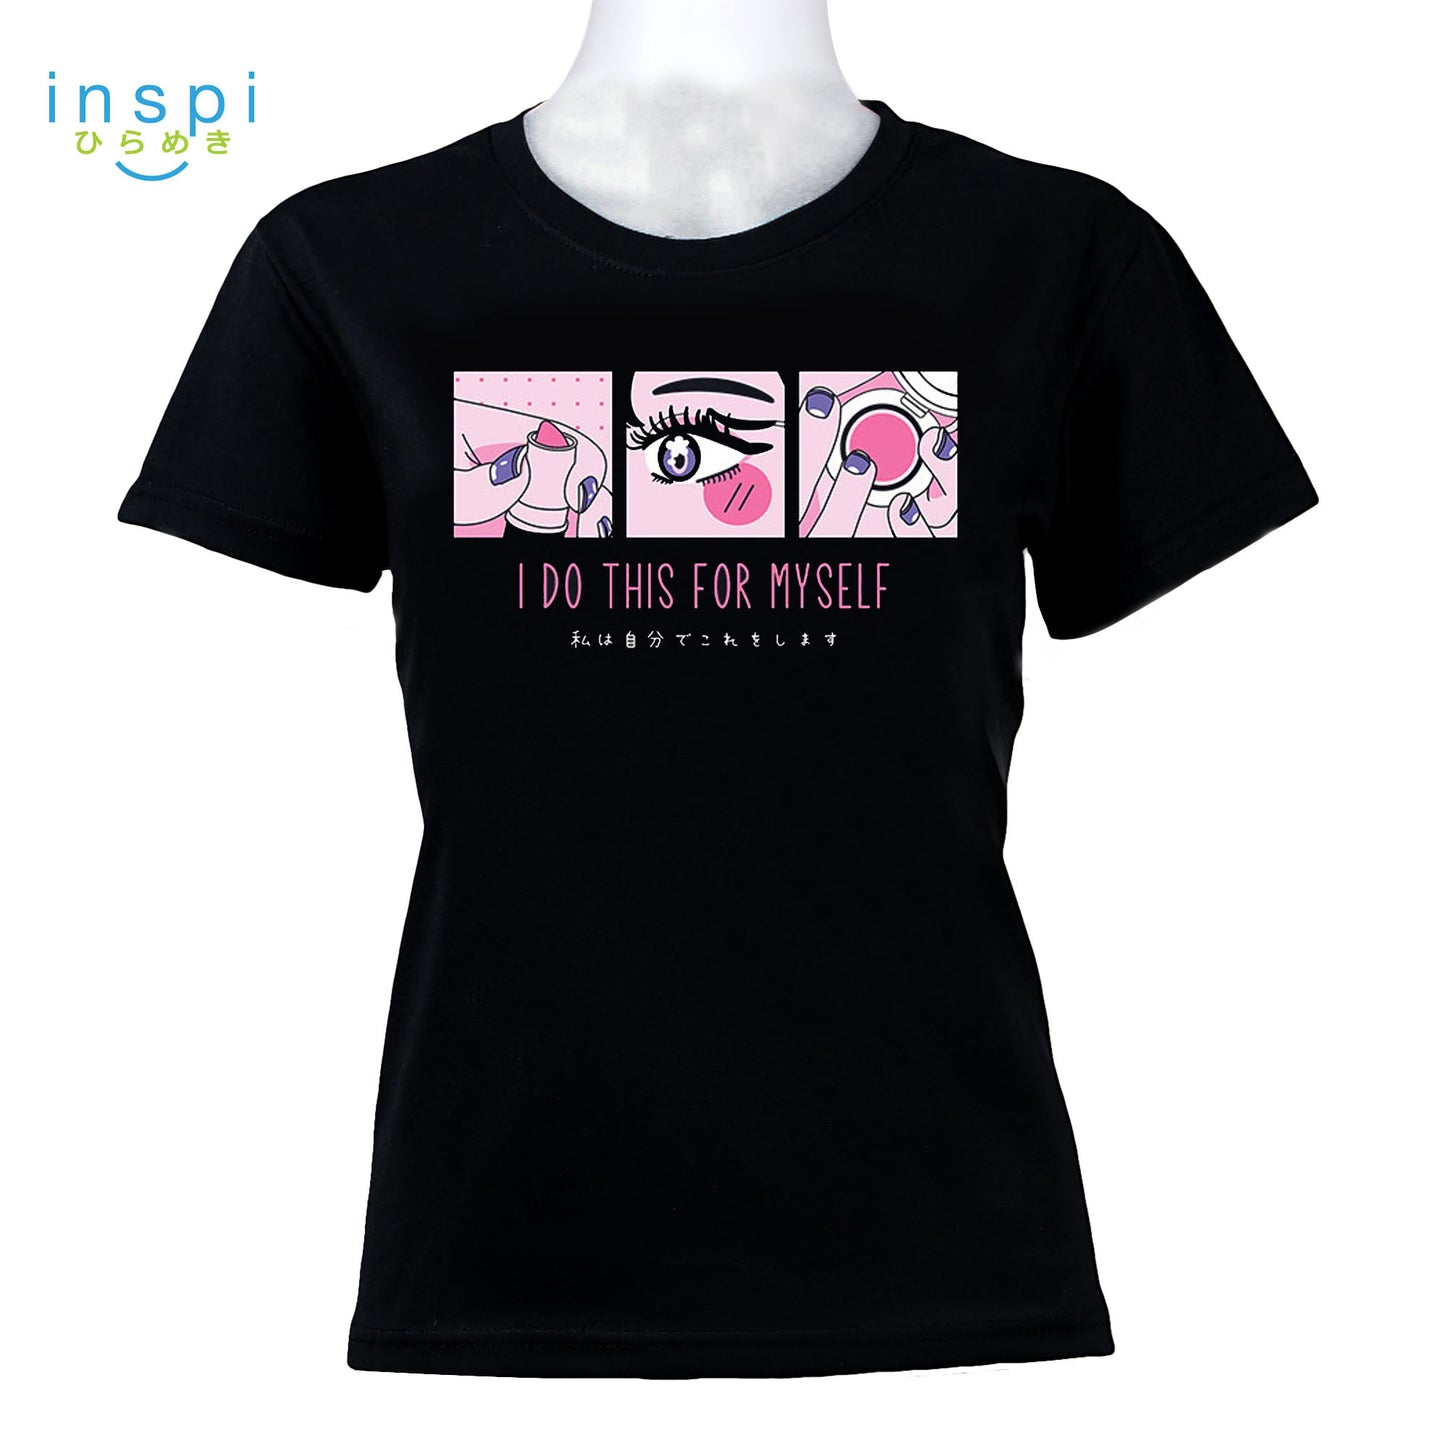 INSPI Tees Ladies Loose Fit For Myself Graphic Tshirt